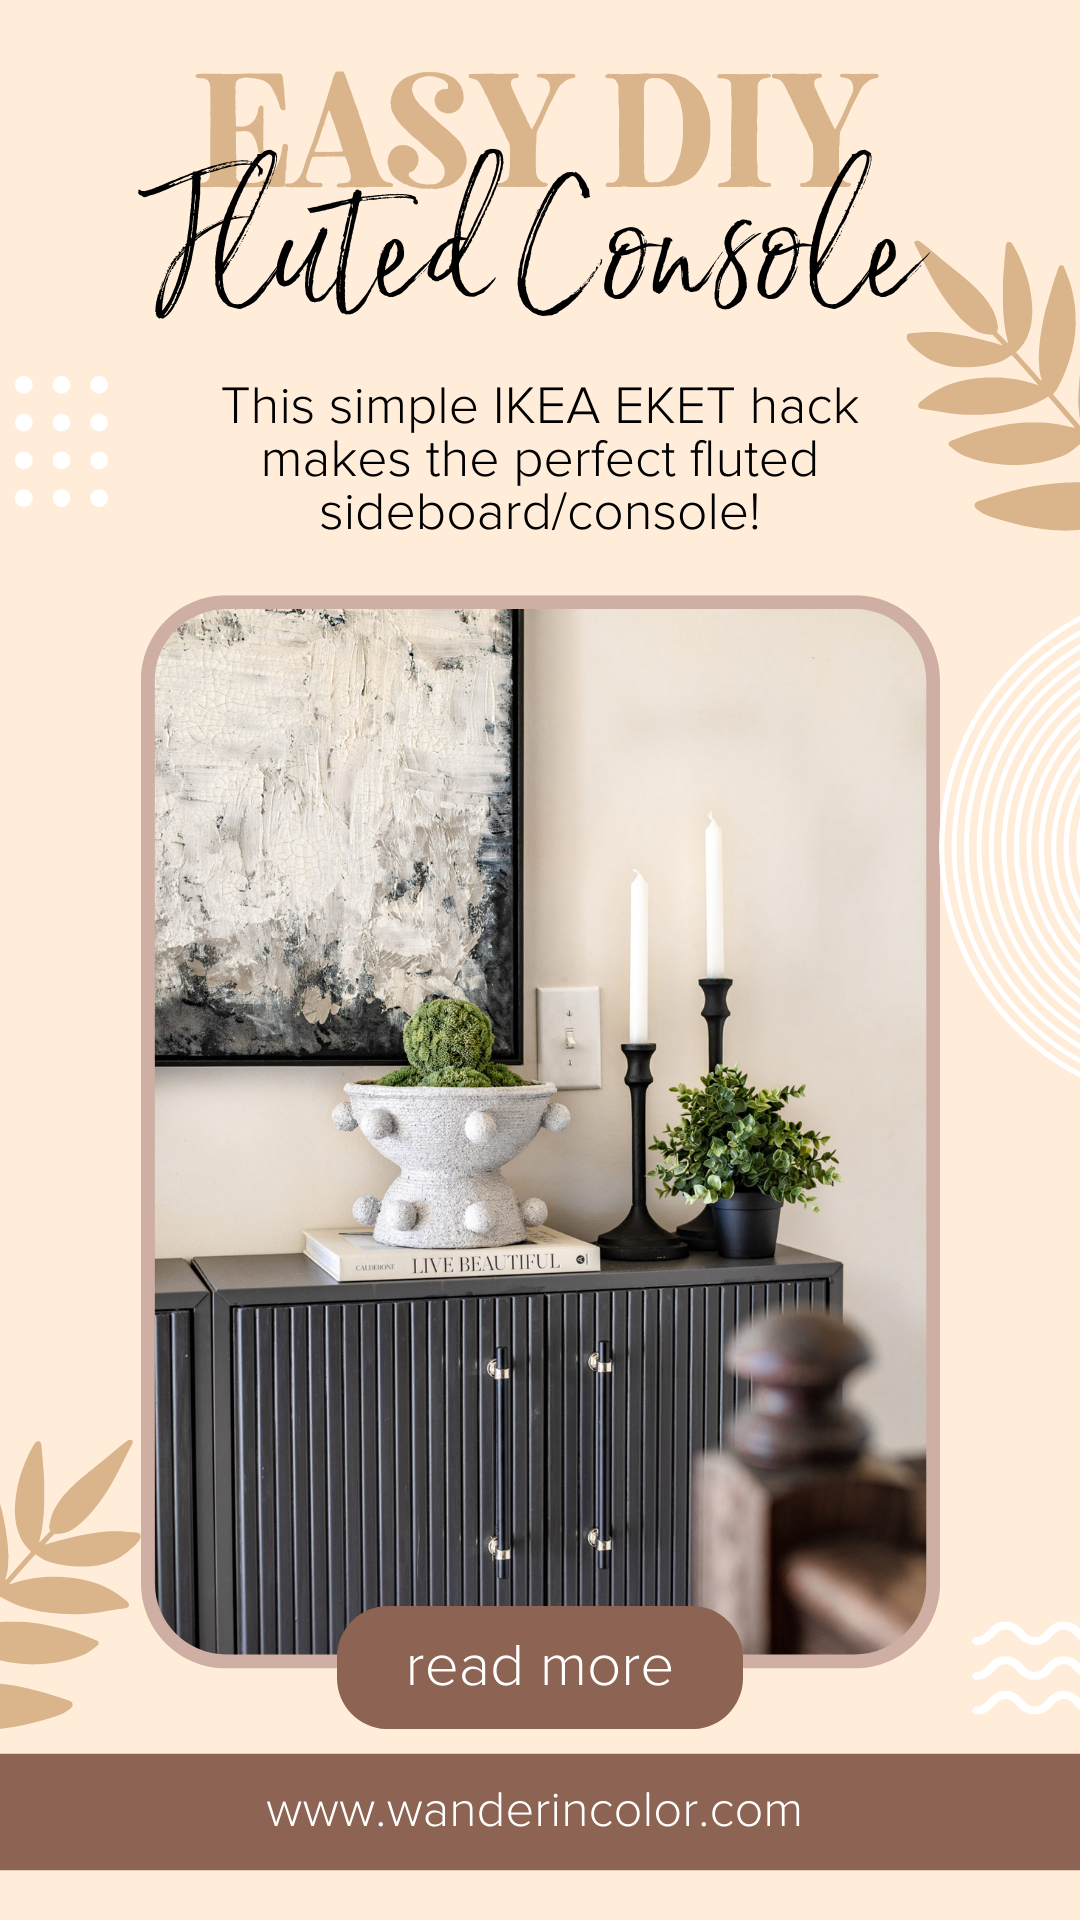 black home decor, how to decorate with black,best ikea hacks, ikea eket hack, ikea hacks, best ikea hacks, diy fluted console, gray and black home decor, decorating with black, modern mid century fluted console, easy ikea upgrades, diy fluted sideboard, budget friendly fluted sideboard, diy fluted sideboard, how to build a sideboard, easy ikea upgrade